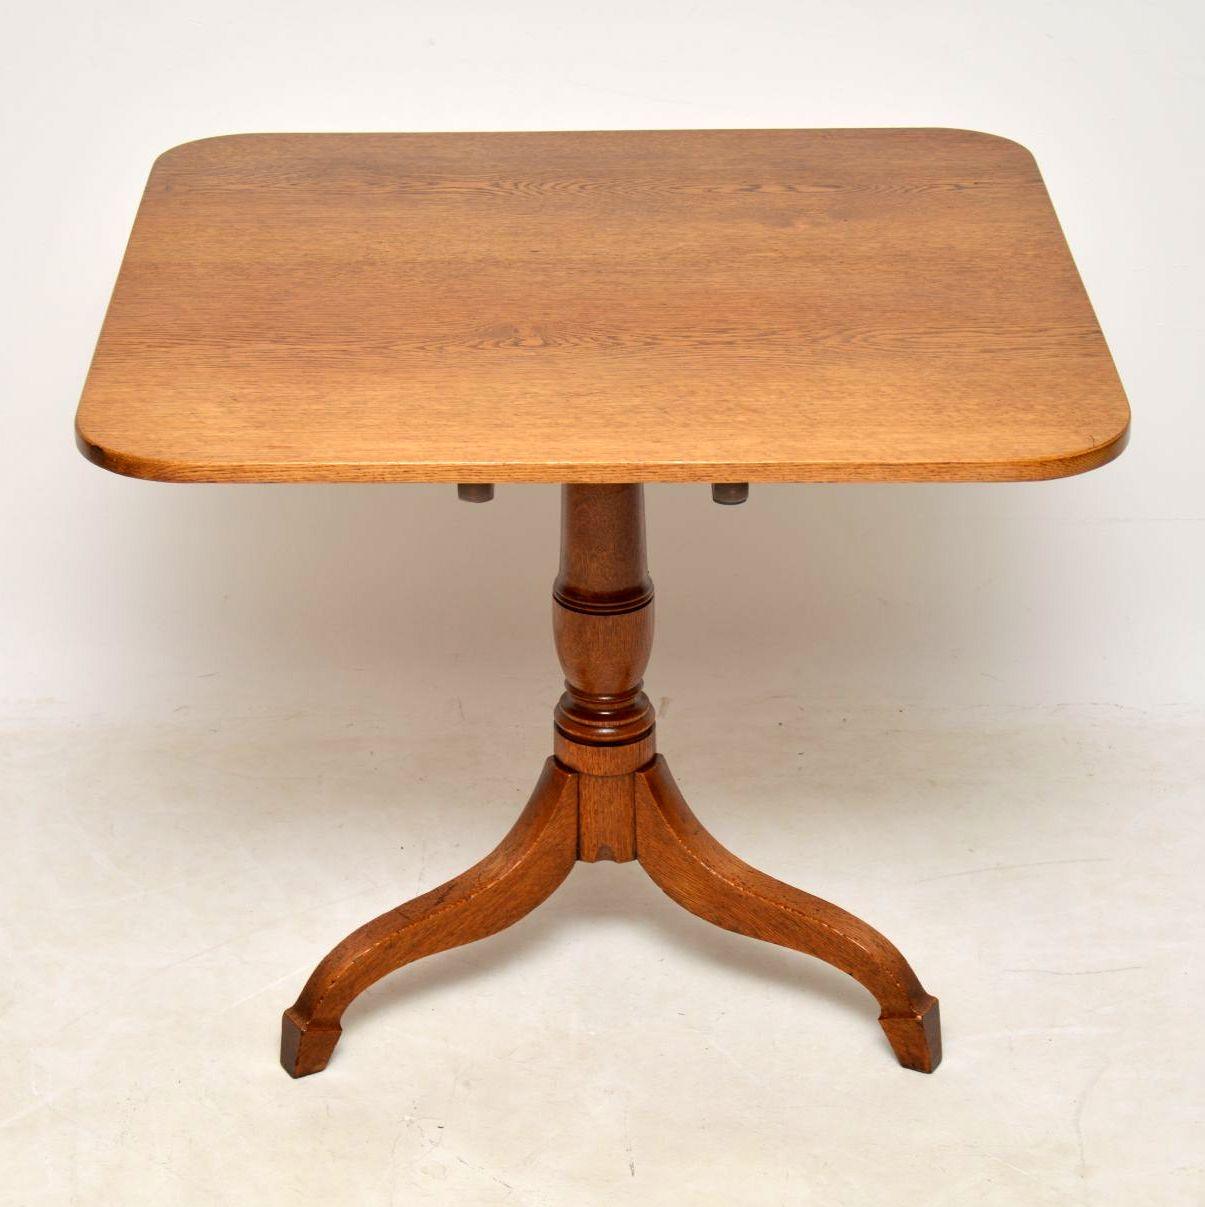 This Georgian solid oak tilt-top table could be used as a small dining table, or just an occasional table. It’s a lovely golden oak, in very good original condition and I would date it to the 1790s period. There are no splits or warps and it’s